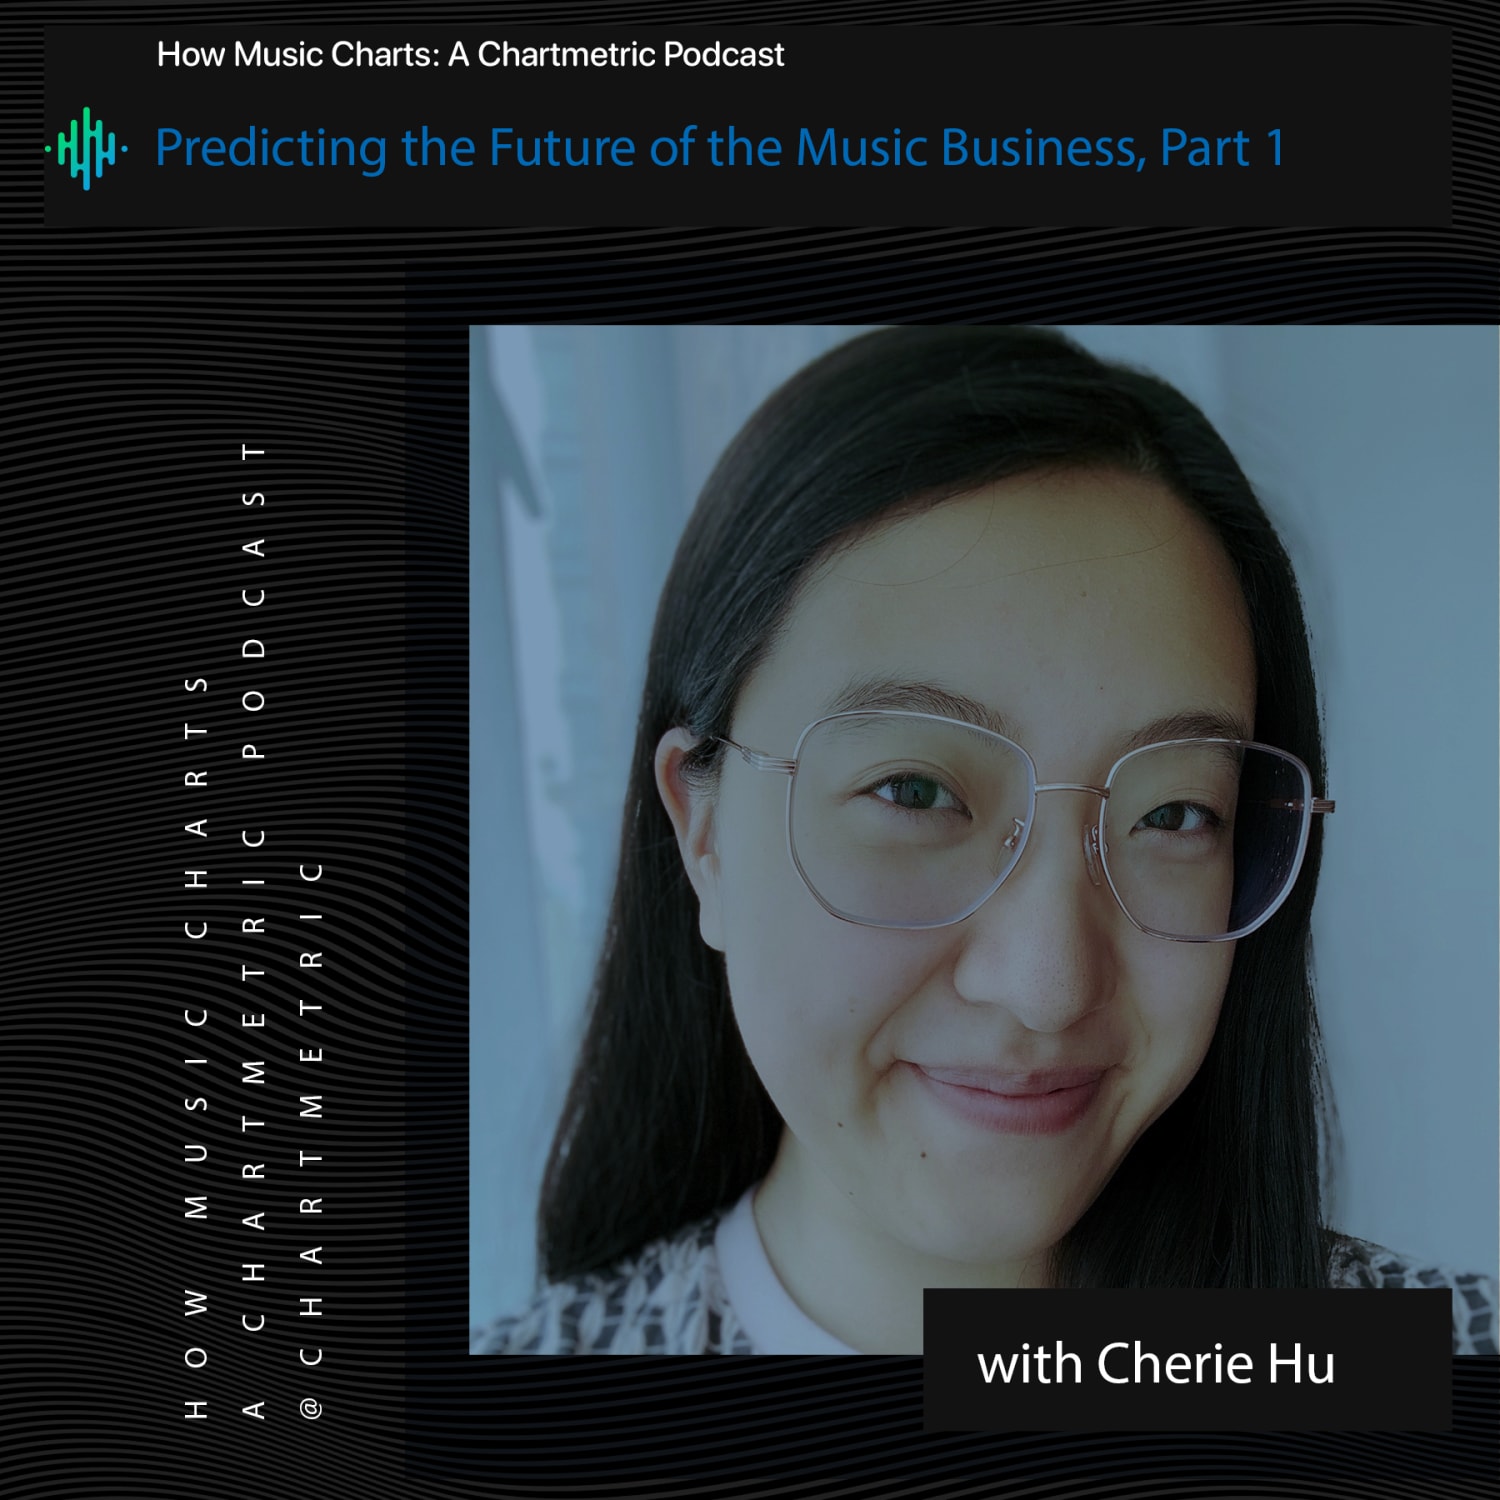 How Music Charts: The Future of the Music Business w/ Cherie Hu, Pt. 1